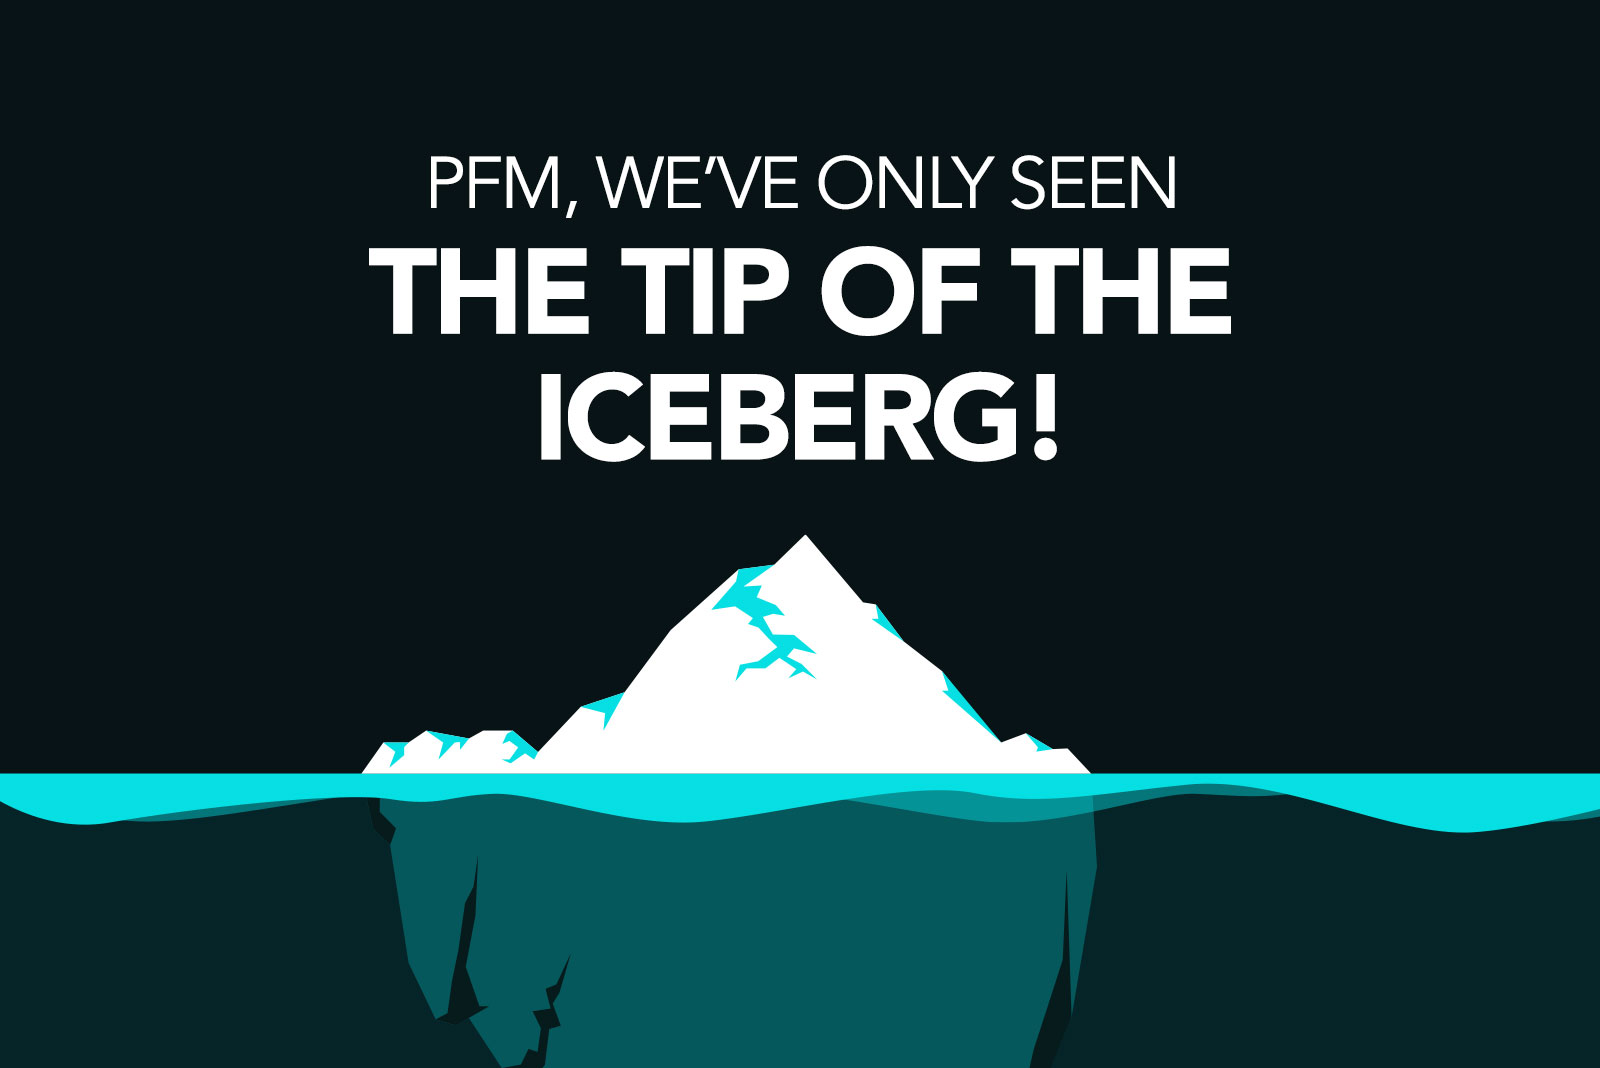 Iceberg illustration with title PFM, we've only seen the tip of the iceberg